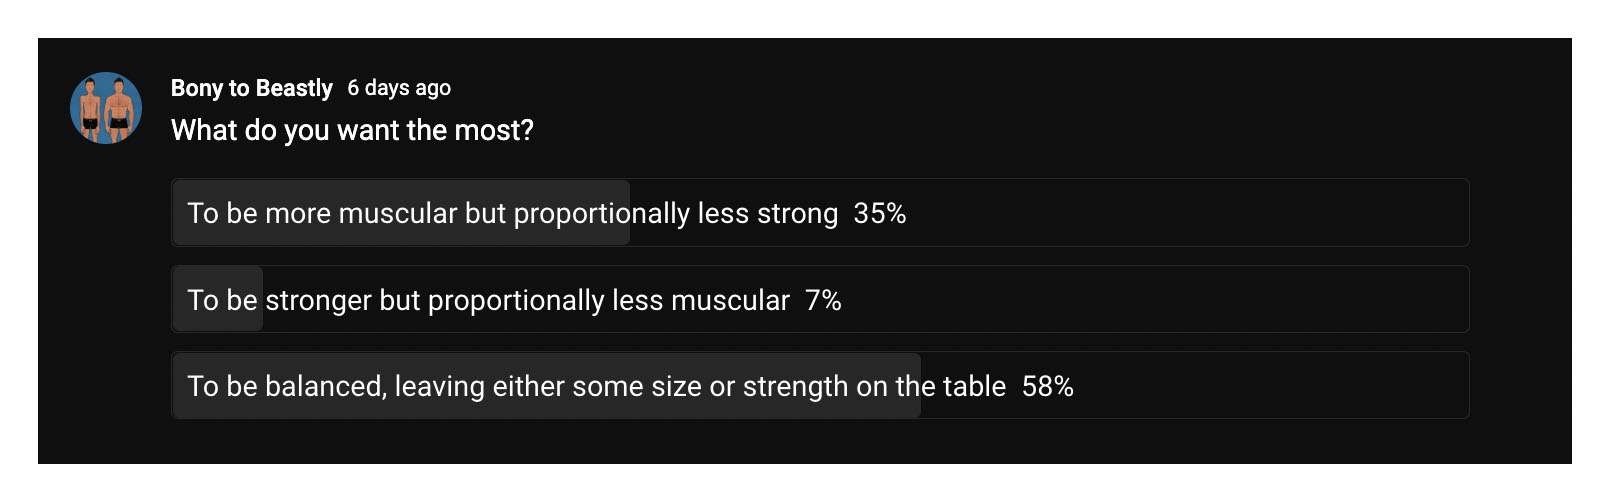 Poll showing that most skinny guys want to become both big and strong.